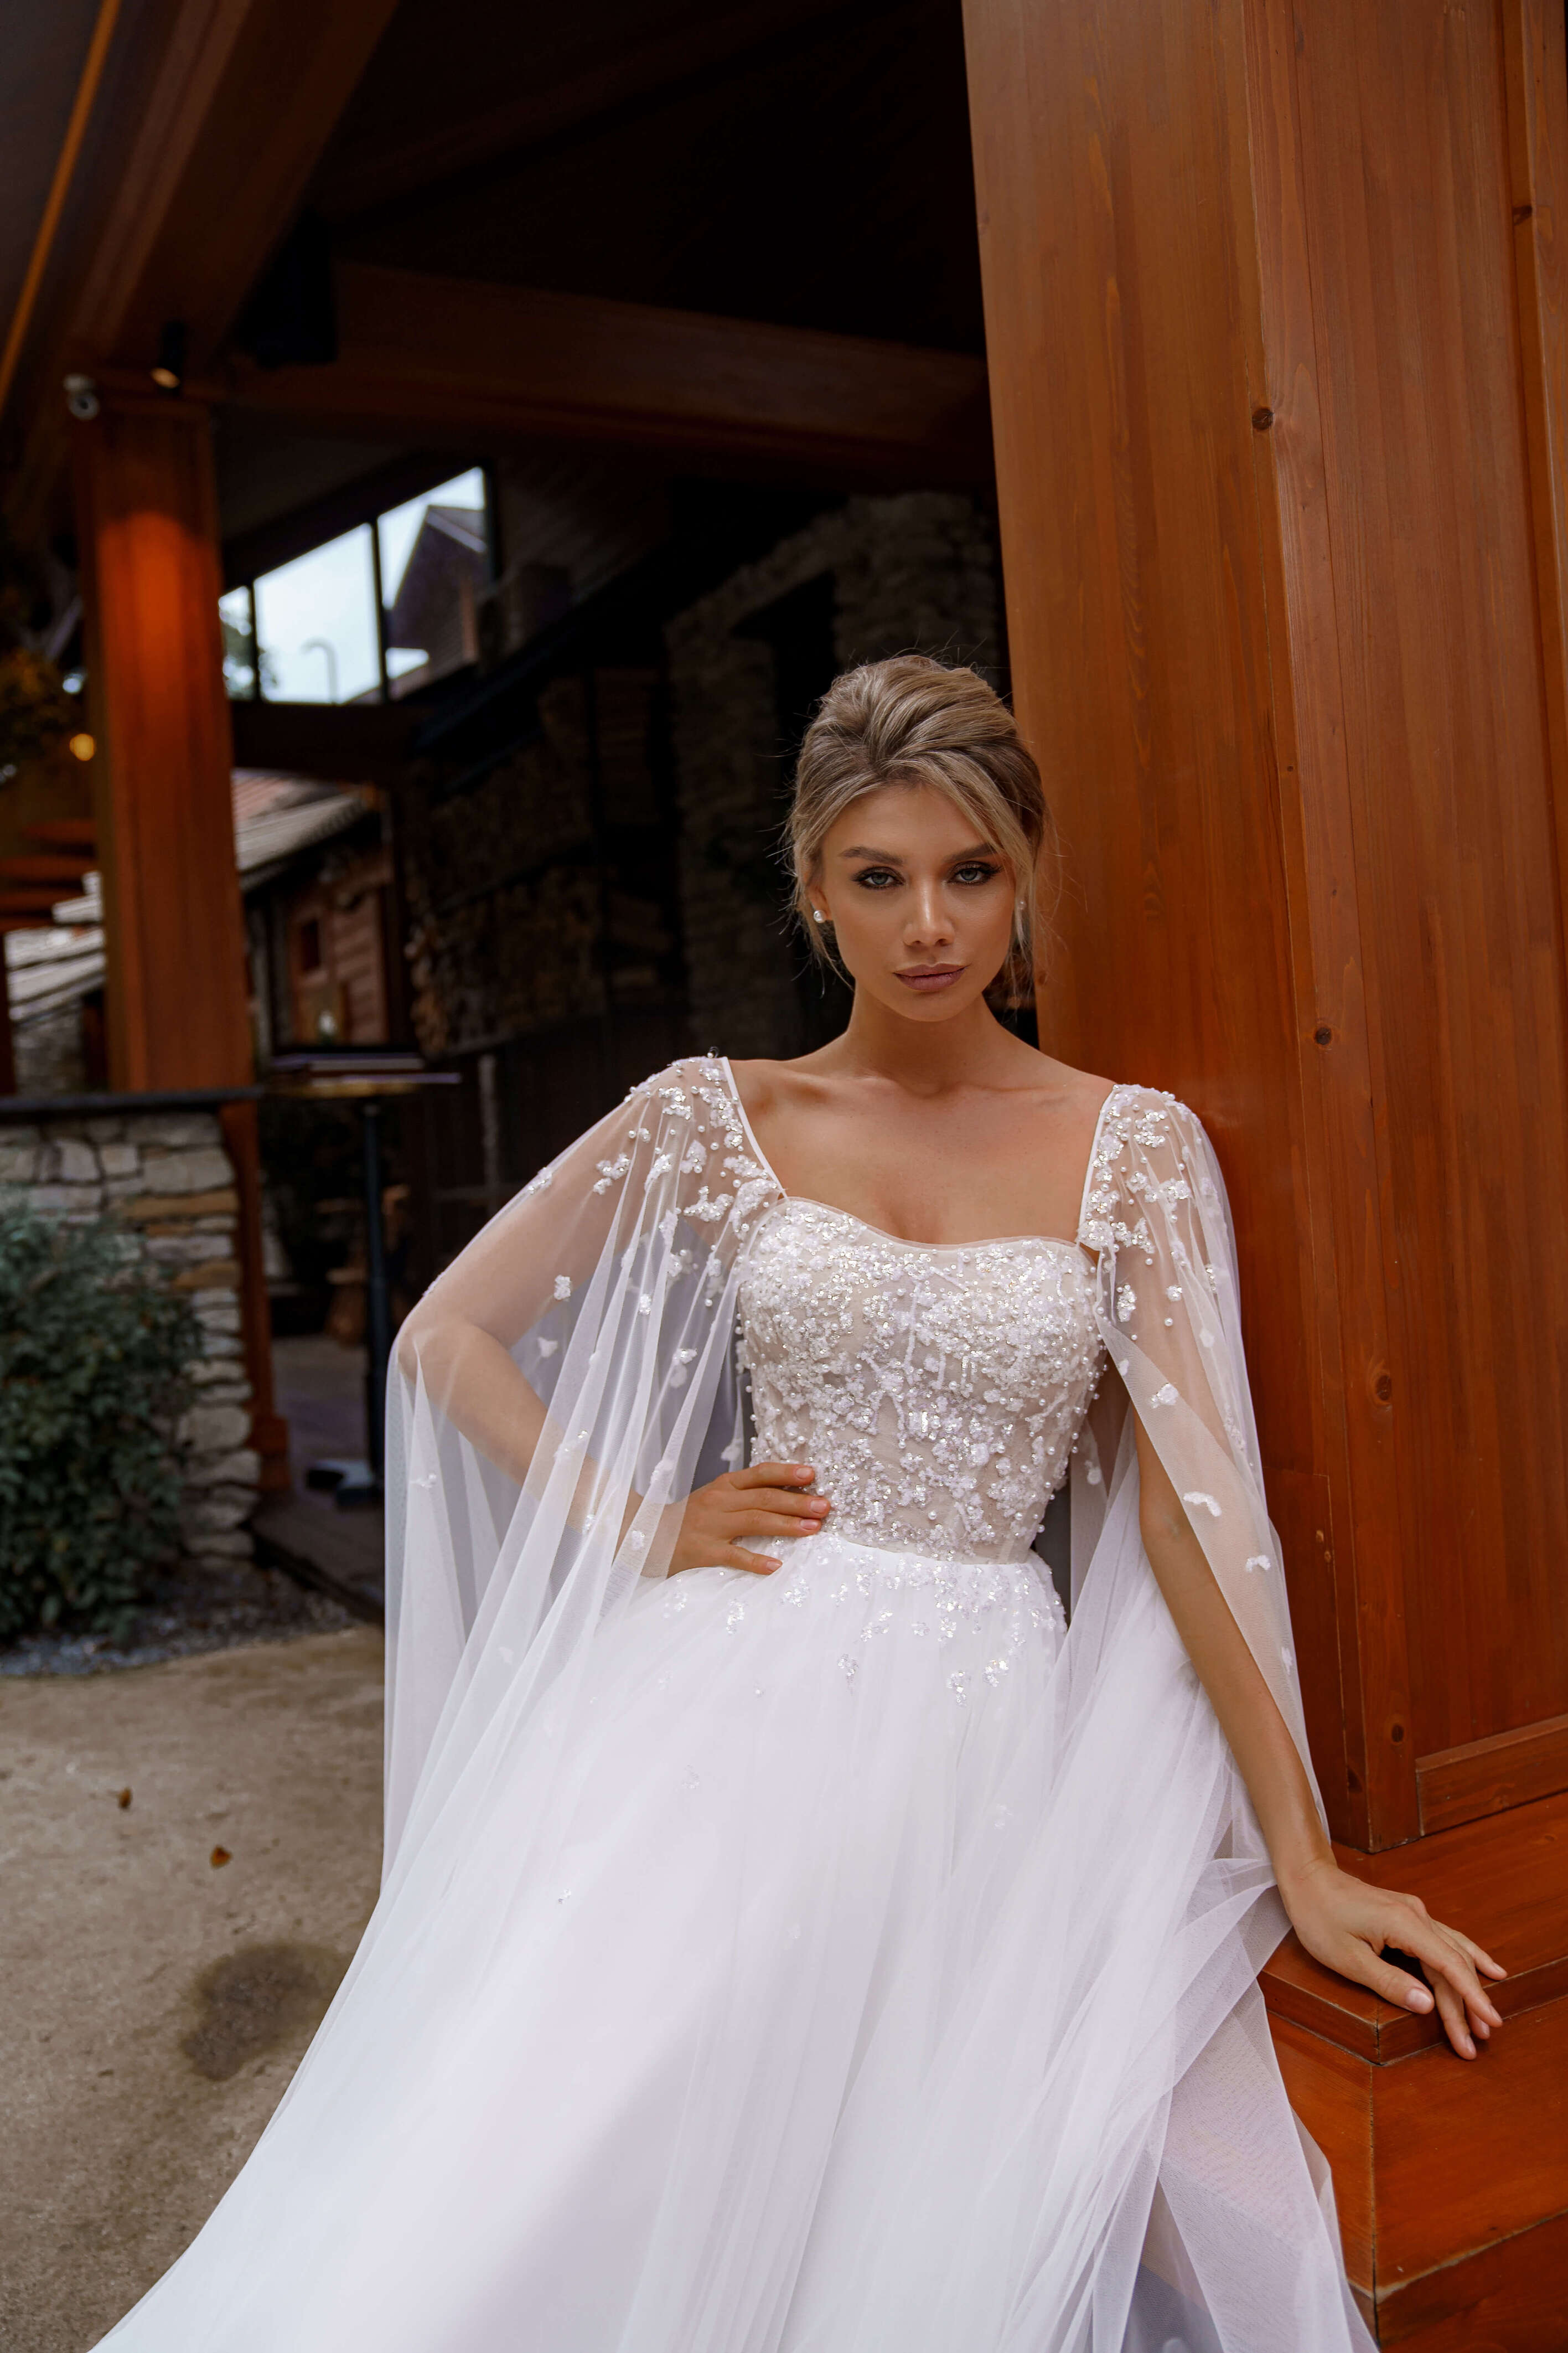 A-Line Wedding Dress with Open Shoulders & Long Wing Sleeves Sonesta Kais